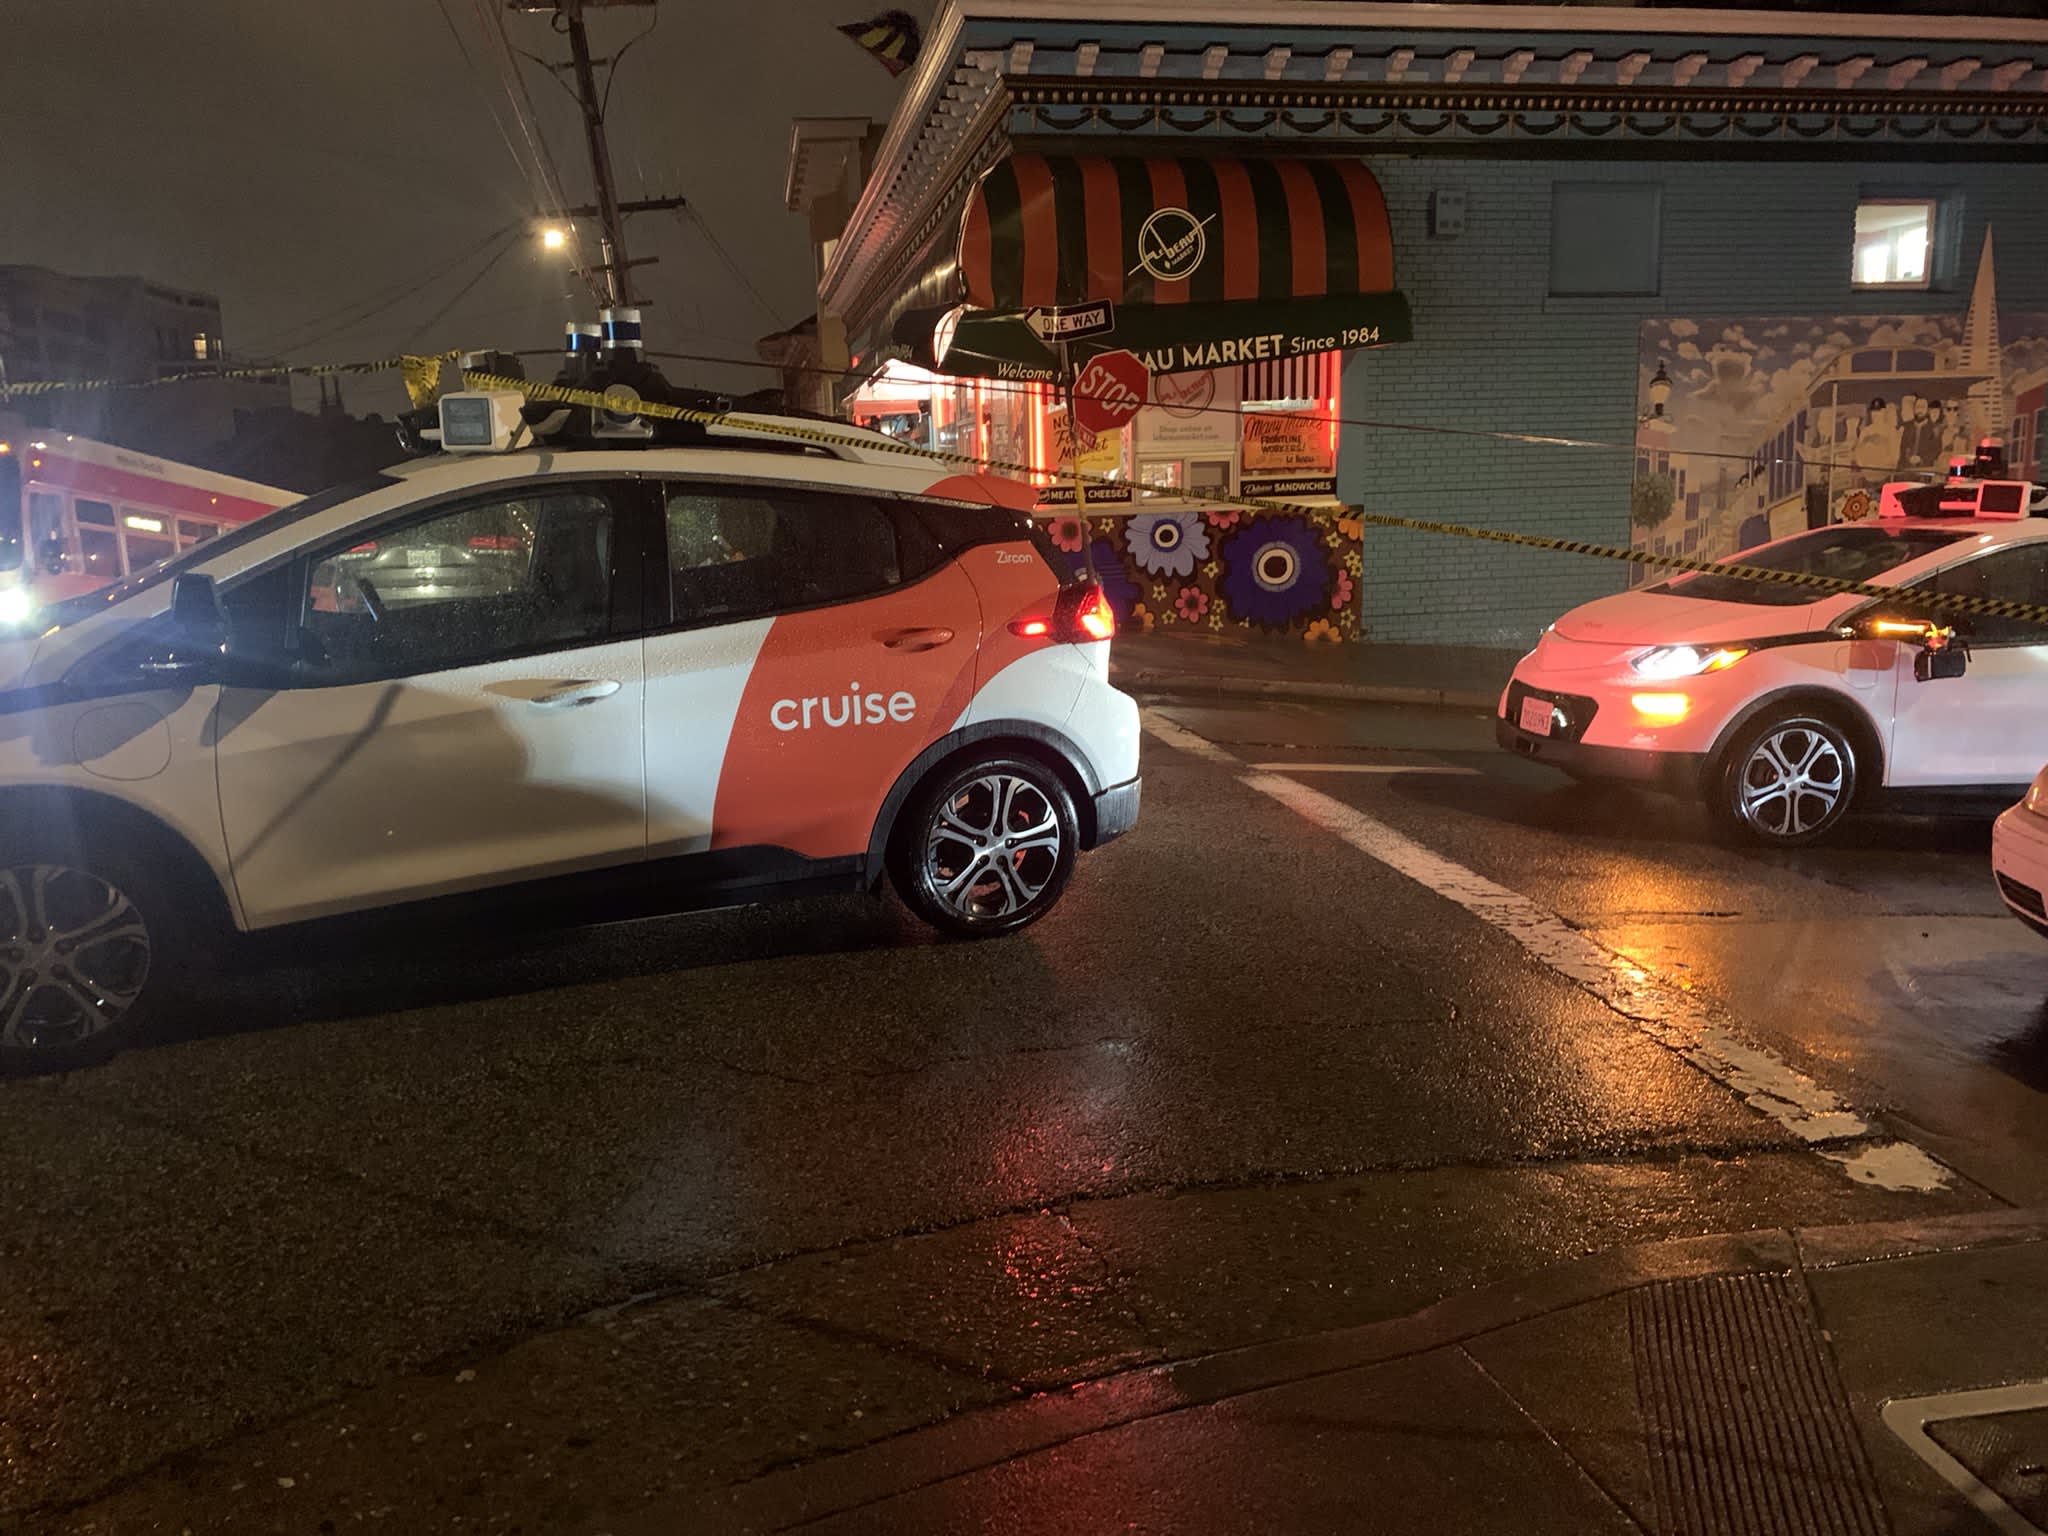 Cruise robotaxis blocked a road in San Francisco after storm